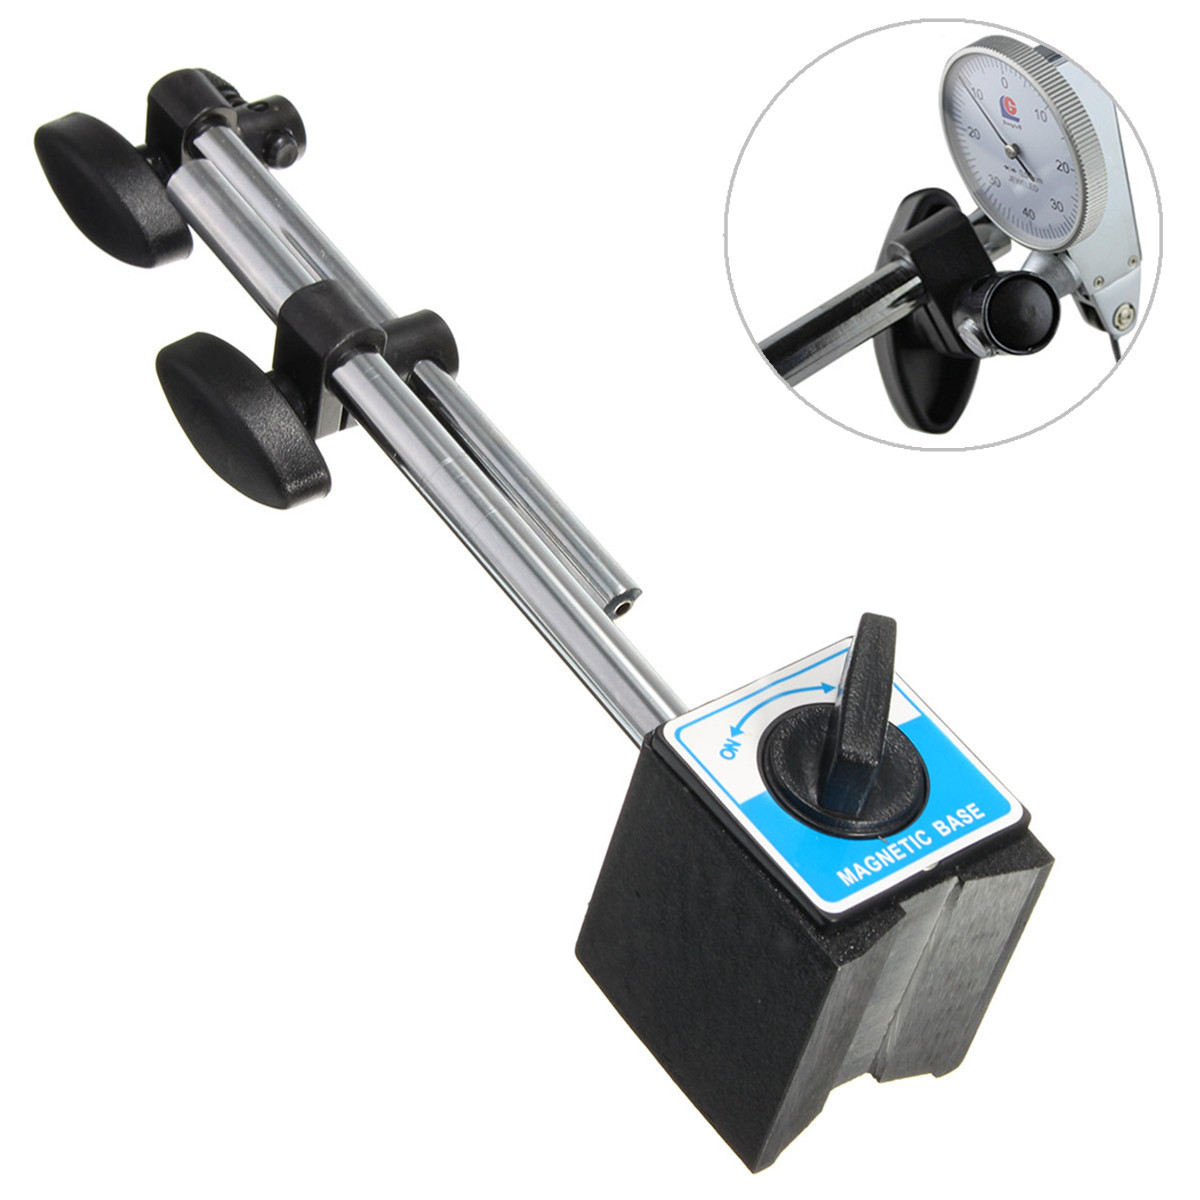 Magnetic-Base-Holder-With-Double-Adjustable-Pole-For-Dial-Indicator-Test-Gauge-1041324